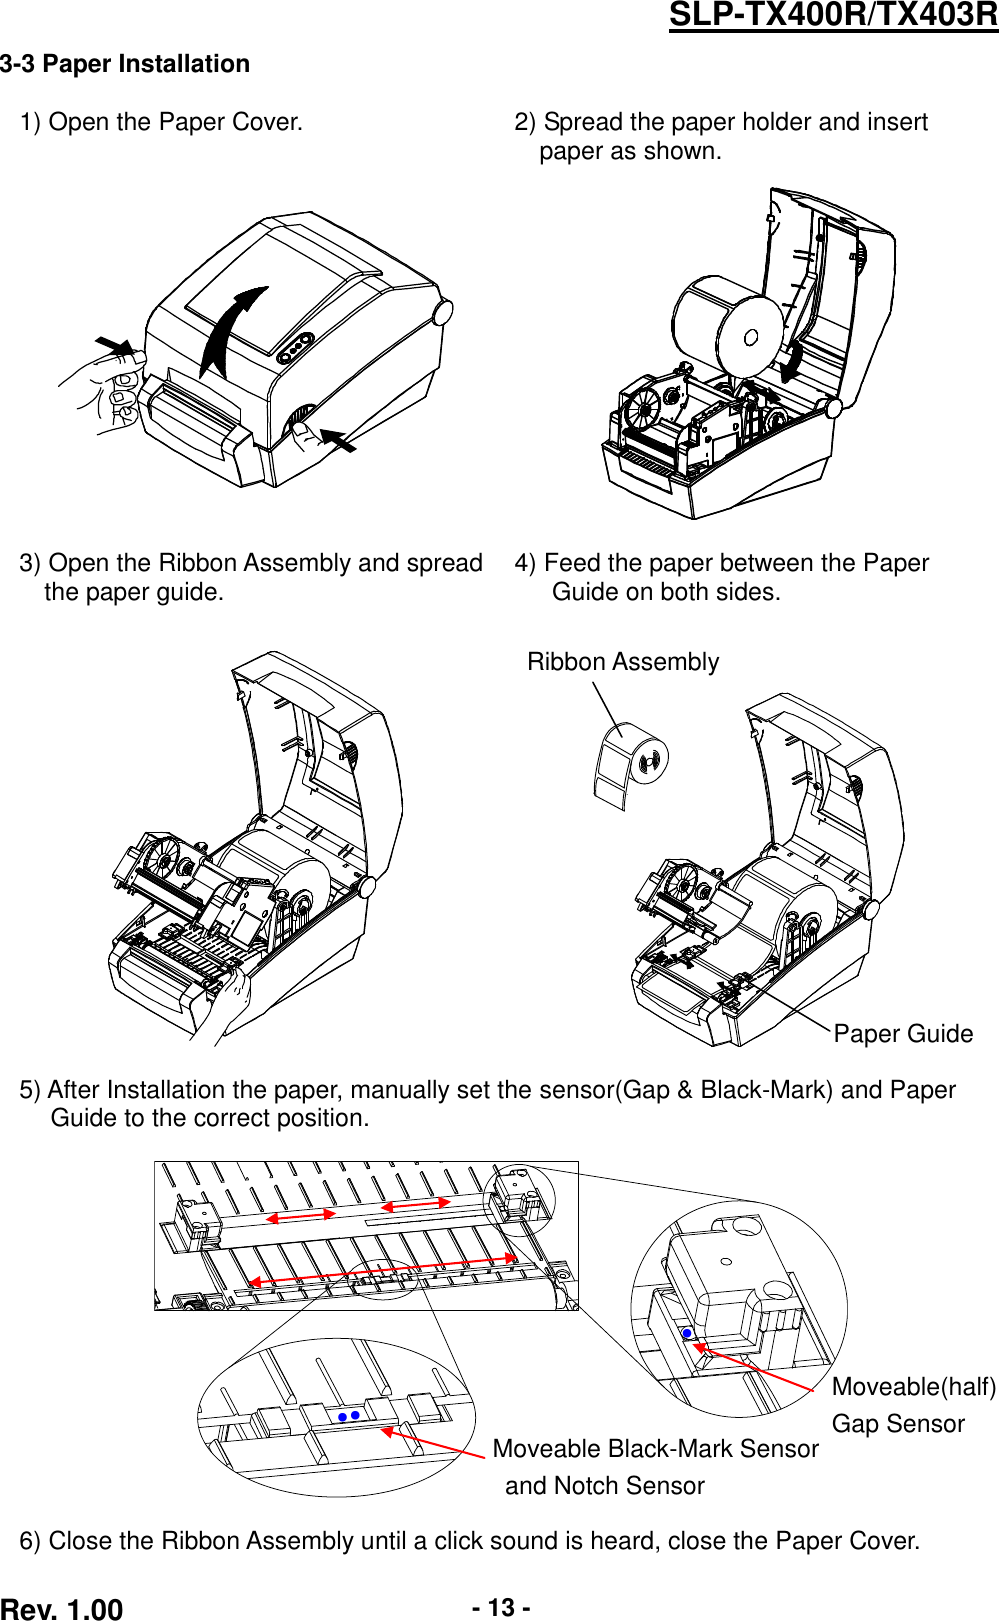  Rev. 1.00 - 13 - SLP-TX400R/TX403R 3-3 Paper Installation  1) Open the Paper Cover. 2) Spread the paper holder and insert paper as shown.      3) Open the Ribbon Assembly and spread the paper guide. 4) Feed the paper between the Paper Guide on both sides.        5) After Installation the paper, manually set the sensor(Gap &amp; Black-Mark) and Paper   Guide to the correct position.    6) Close the Ribbon Assembly until a click sound is heard, close the Paper Cover. Paper Guide Ribbon Assembly Moveable Black-Mark Sensor   and Notch Sensor Moveable(half) Gap Sensor ●   ●   ●   